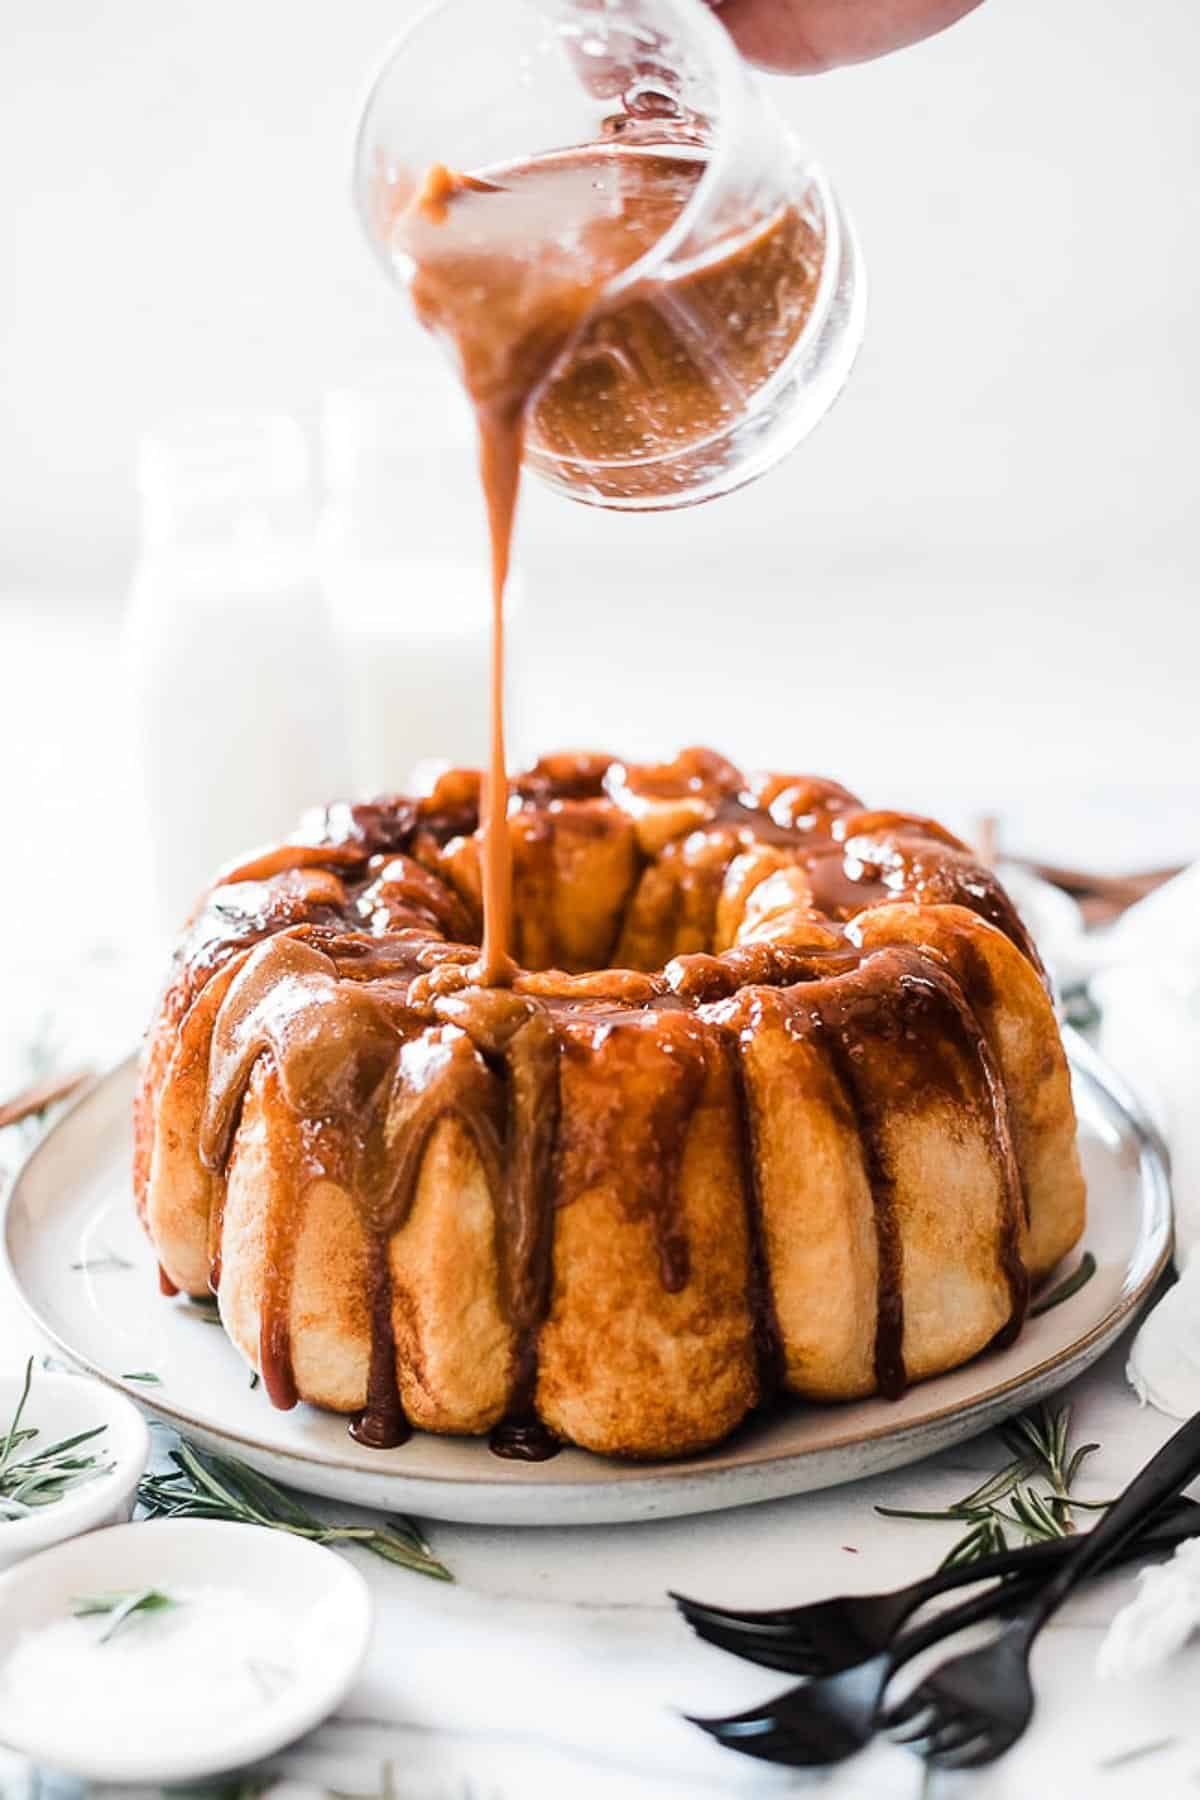 Monkey bread on a cream platter with caramel being pours onto it.